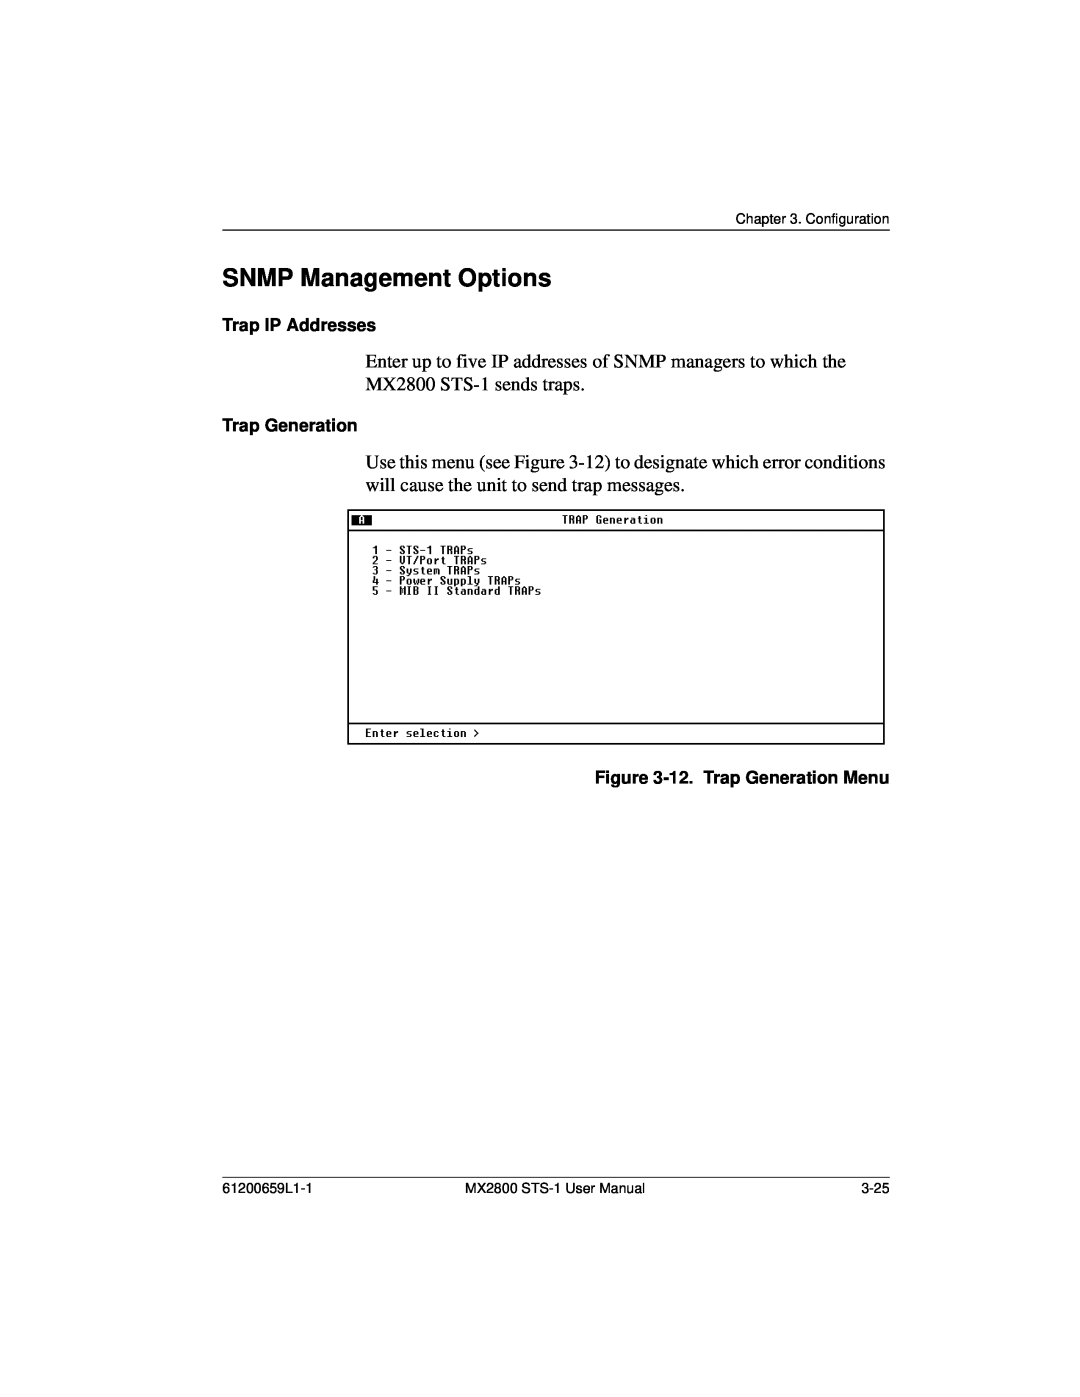 ADTRAN 1200287L1 SNMP Management Options, Enter up to five IP addresses of SNMP managers to which the, Trap IP Addresses 